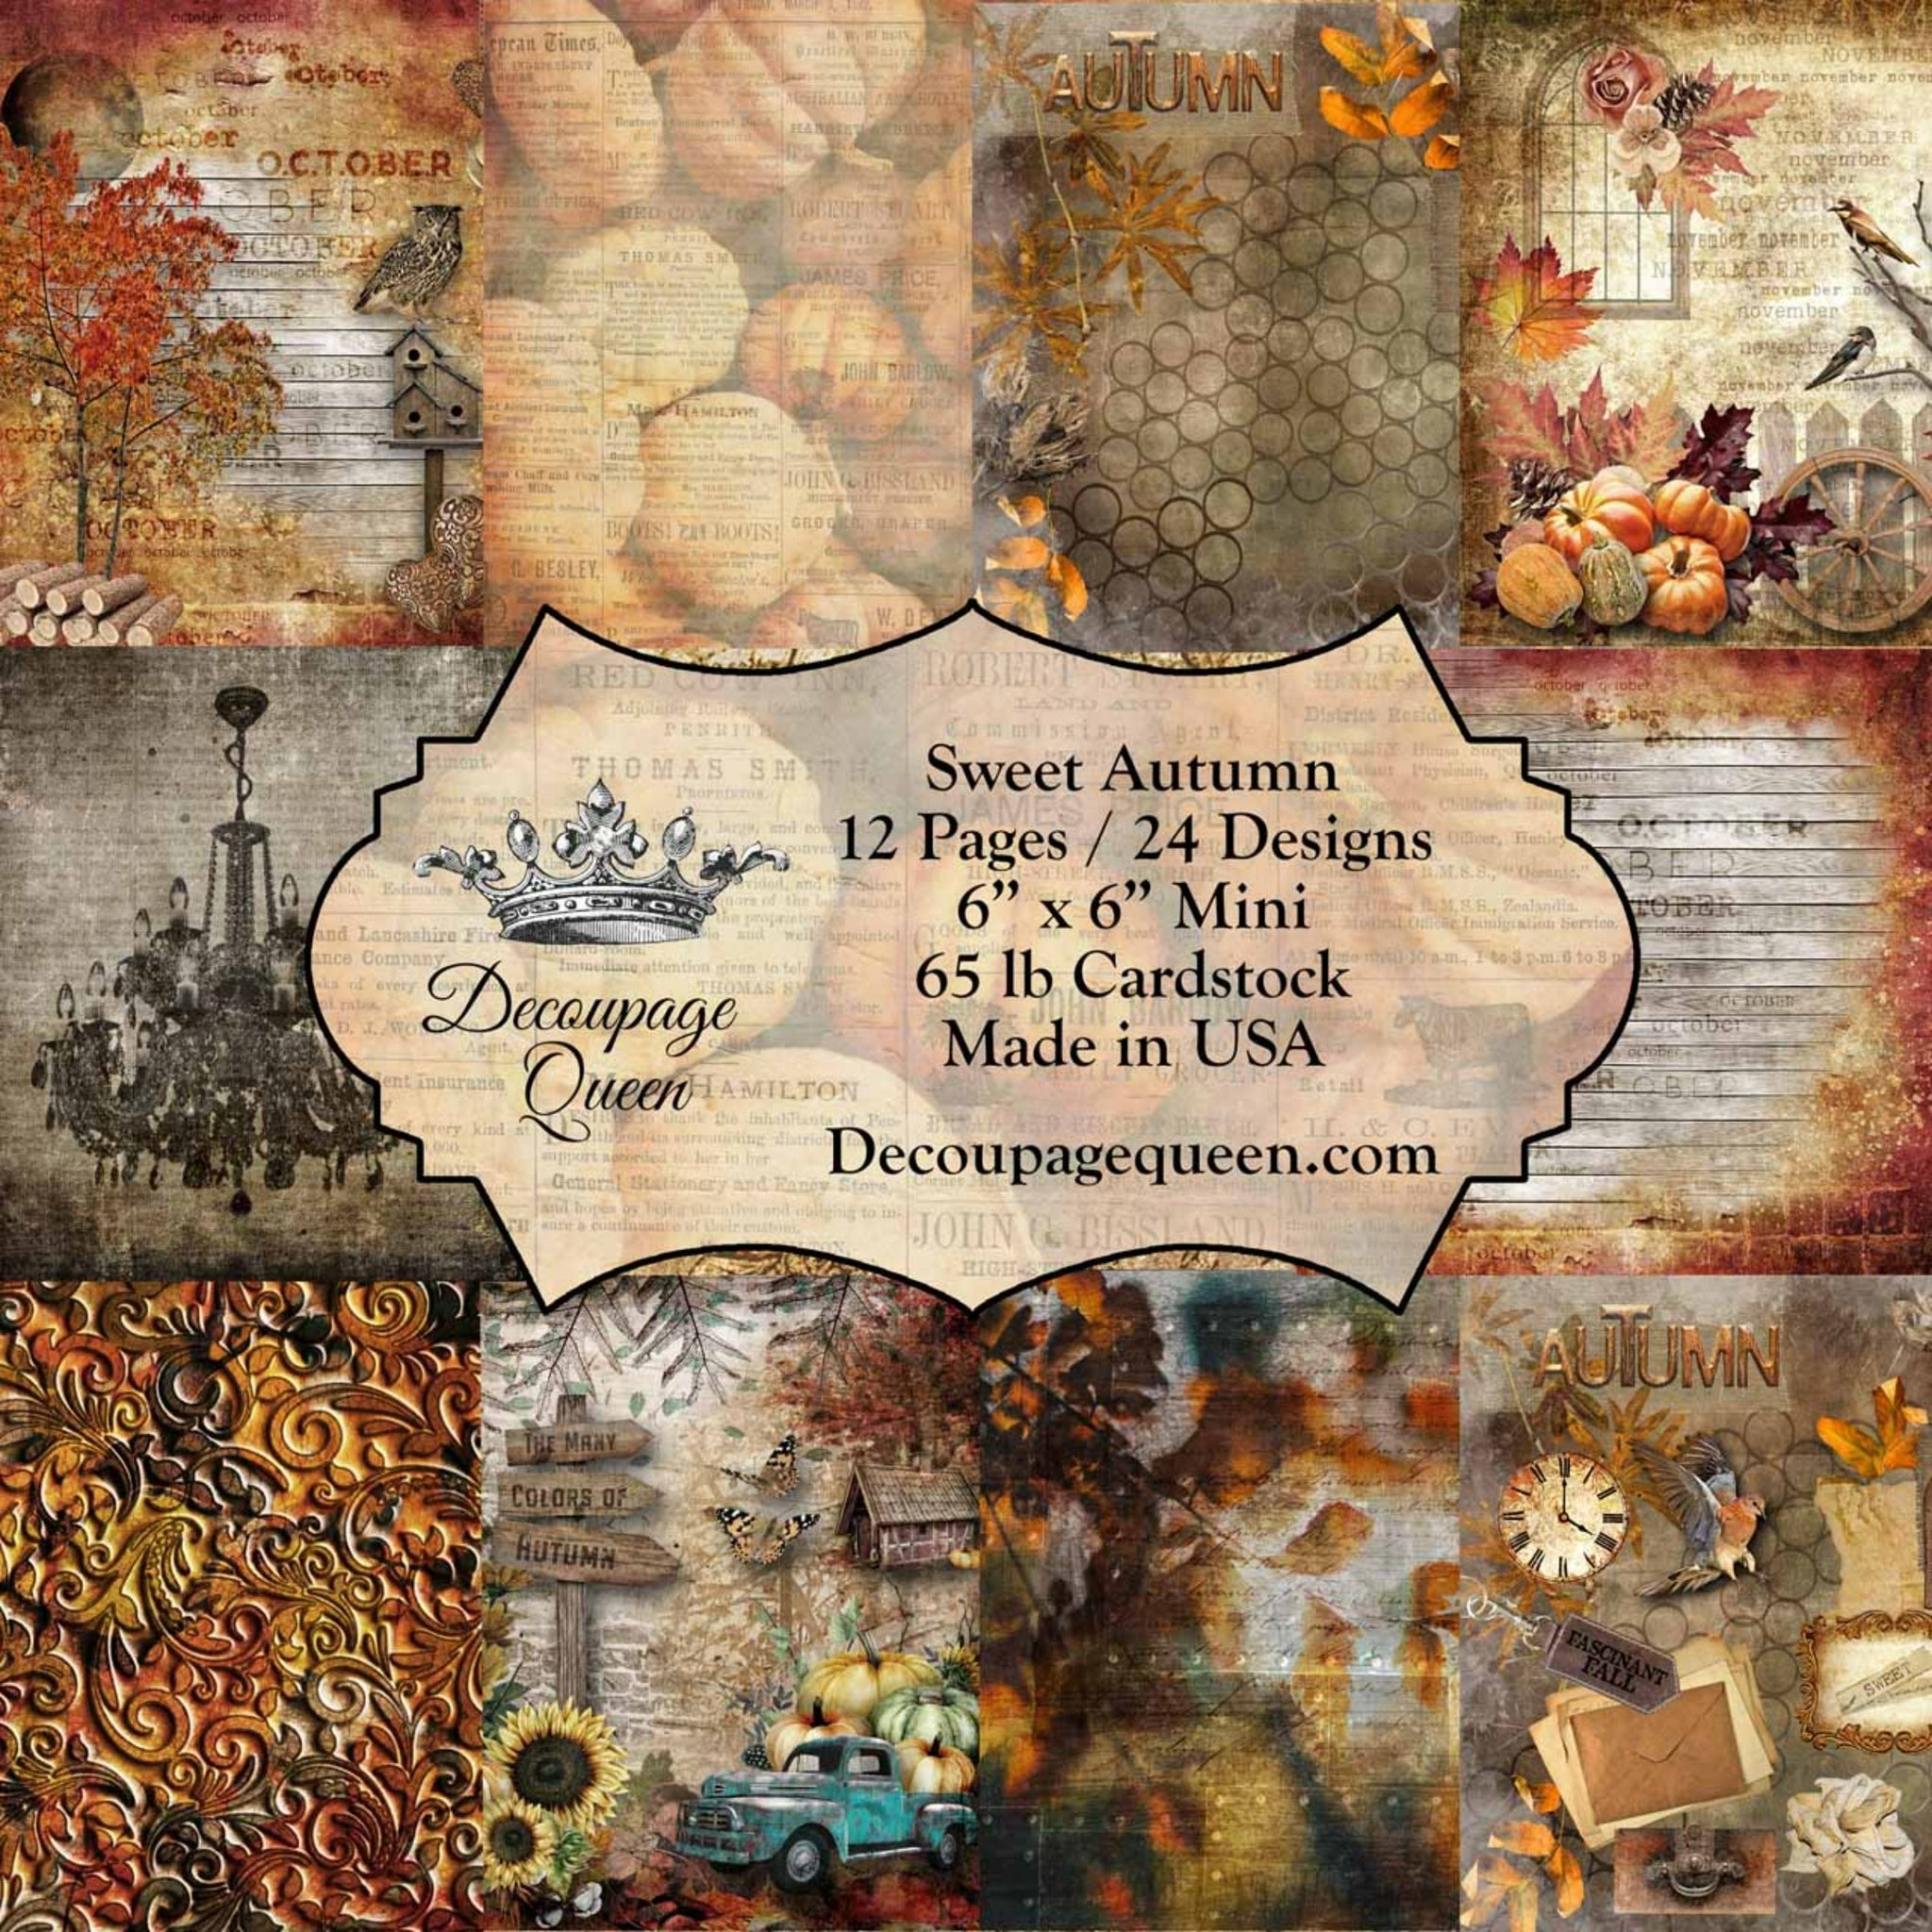 Rice Paper Decoupage ANTIQUARIAN SOCIETY Decoupage Queen Decoupage Paper  Made in Italy Decoupage Papers 